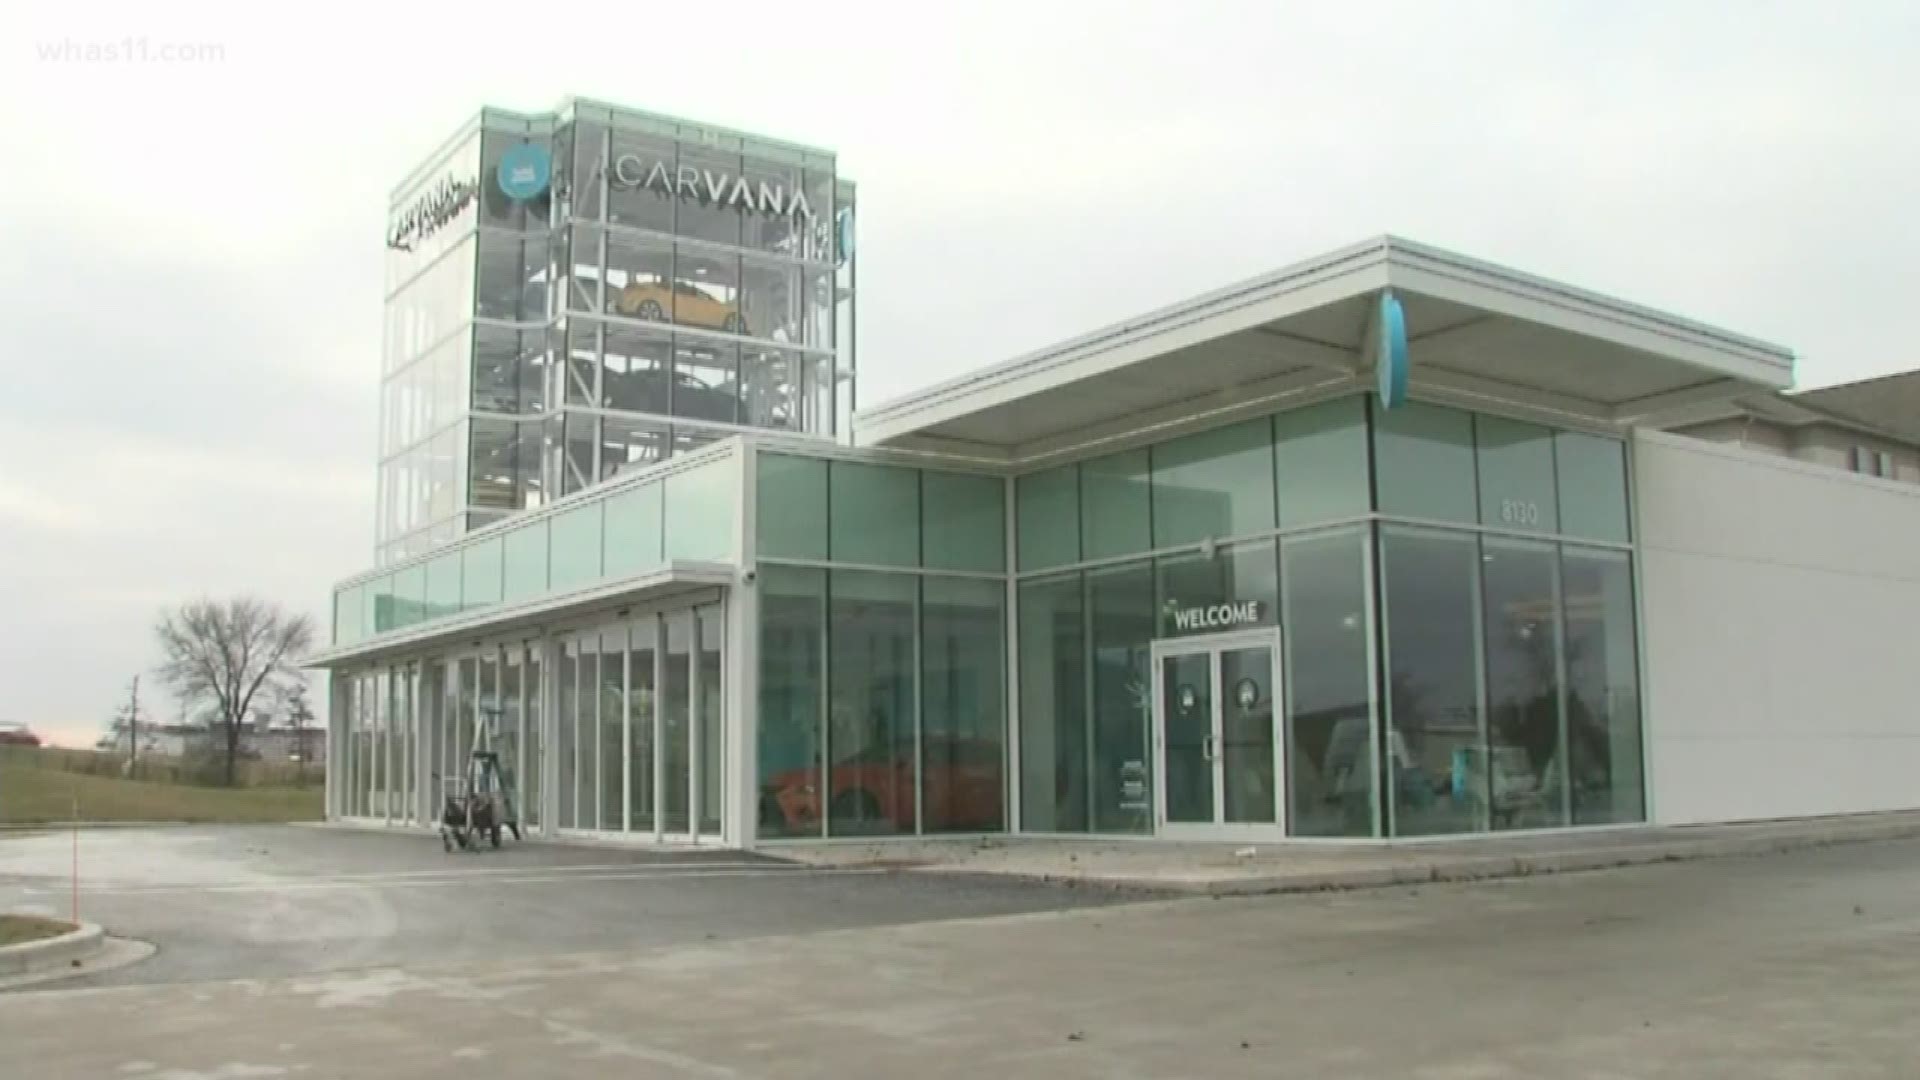 Carvana, an online used car dealer, submitted plans to open a brick-and-mortar store with a car vending machine in Louisville.